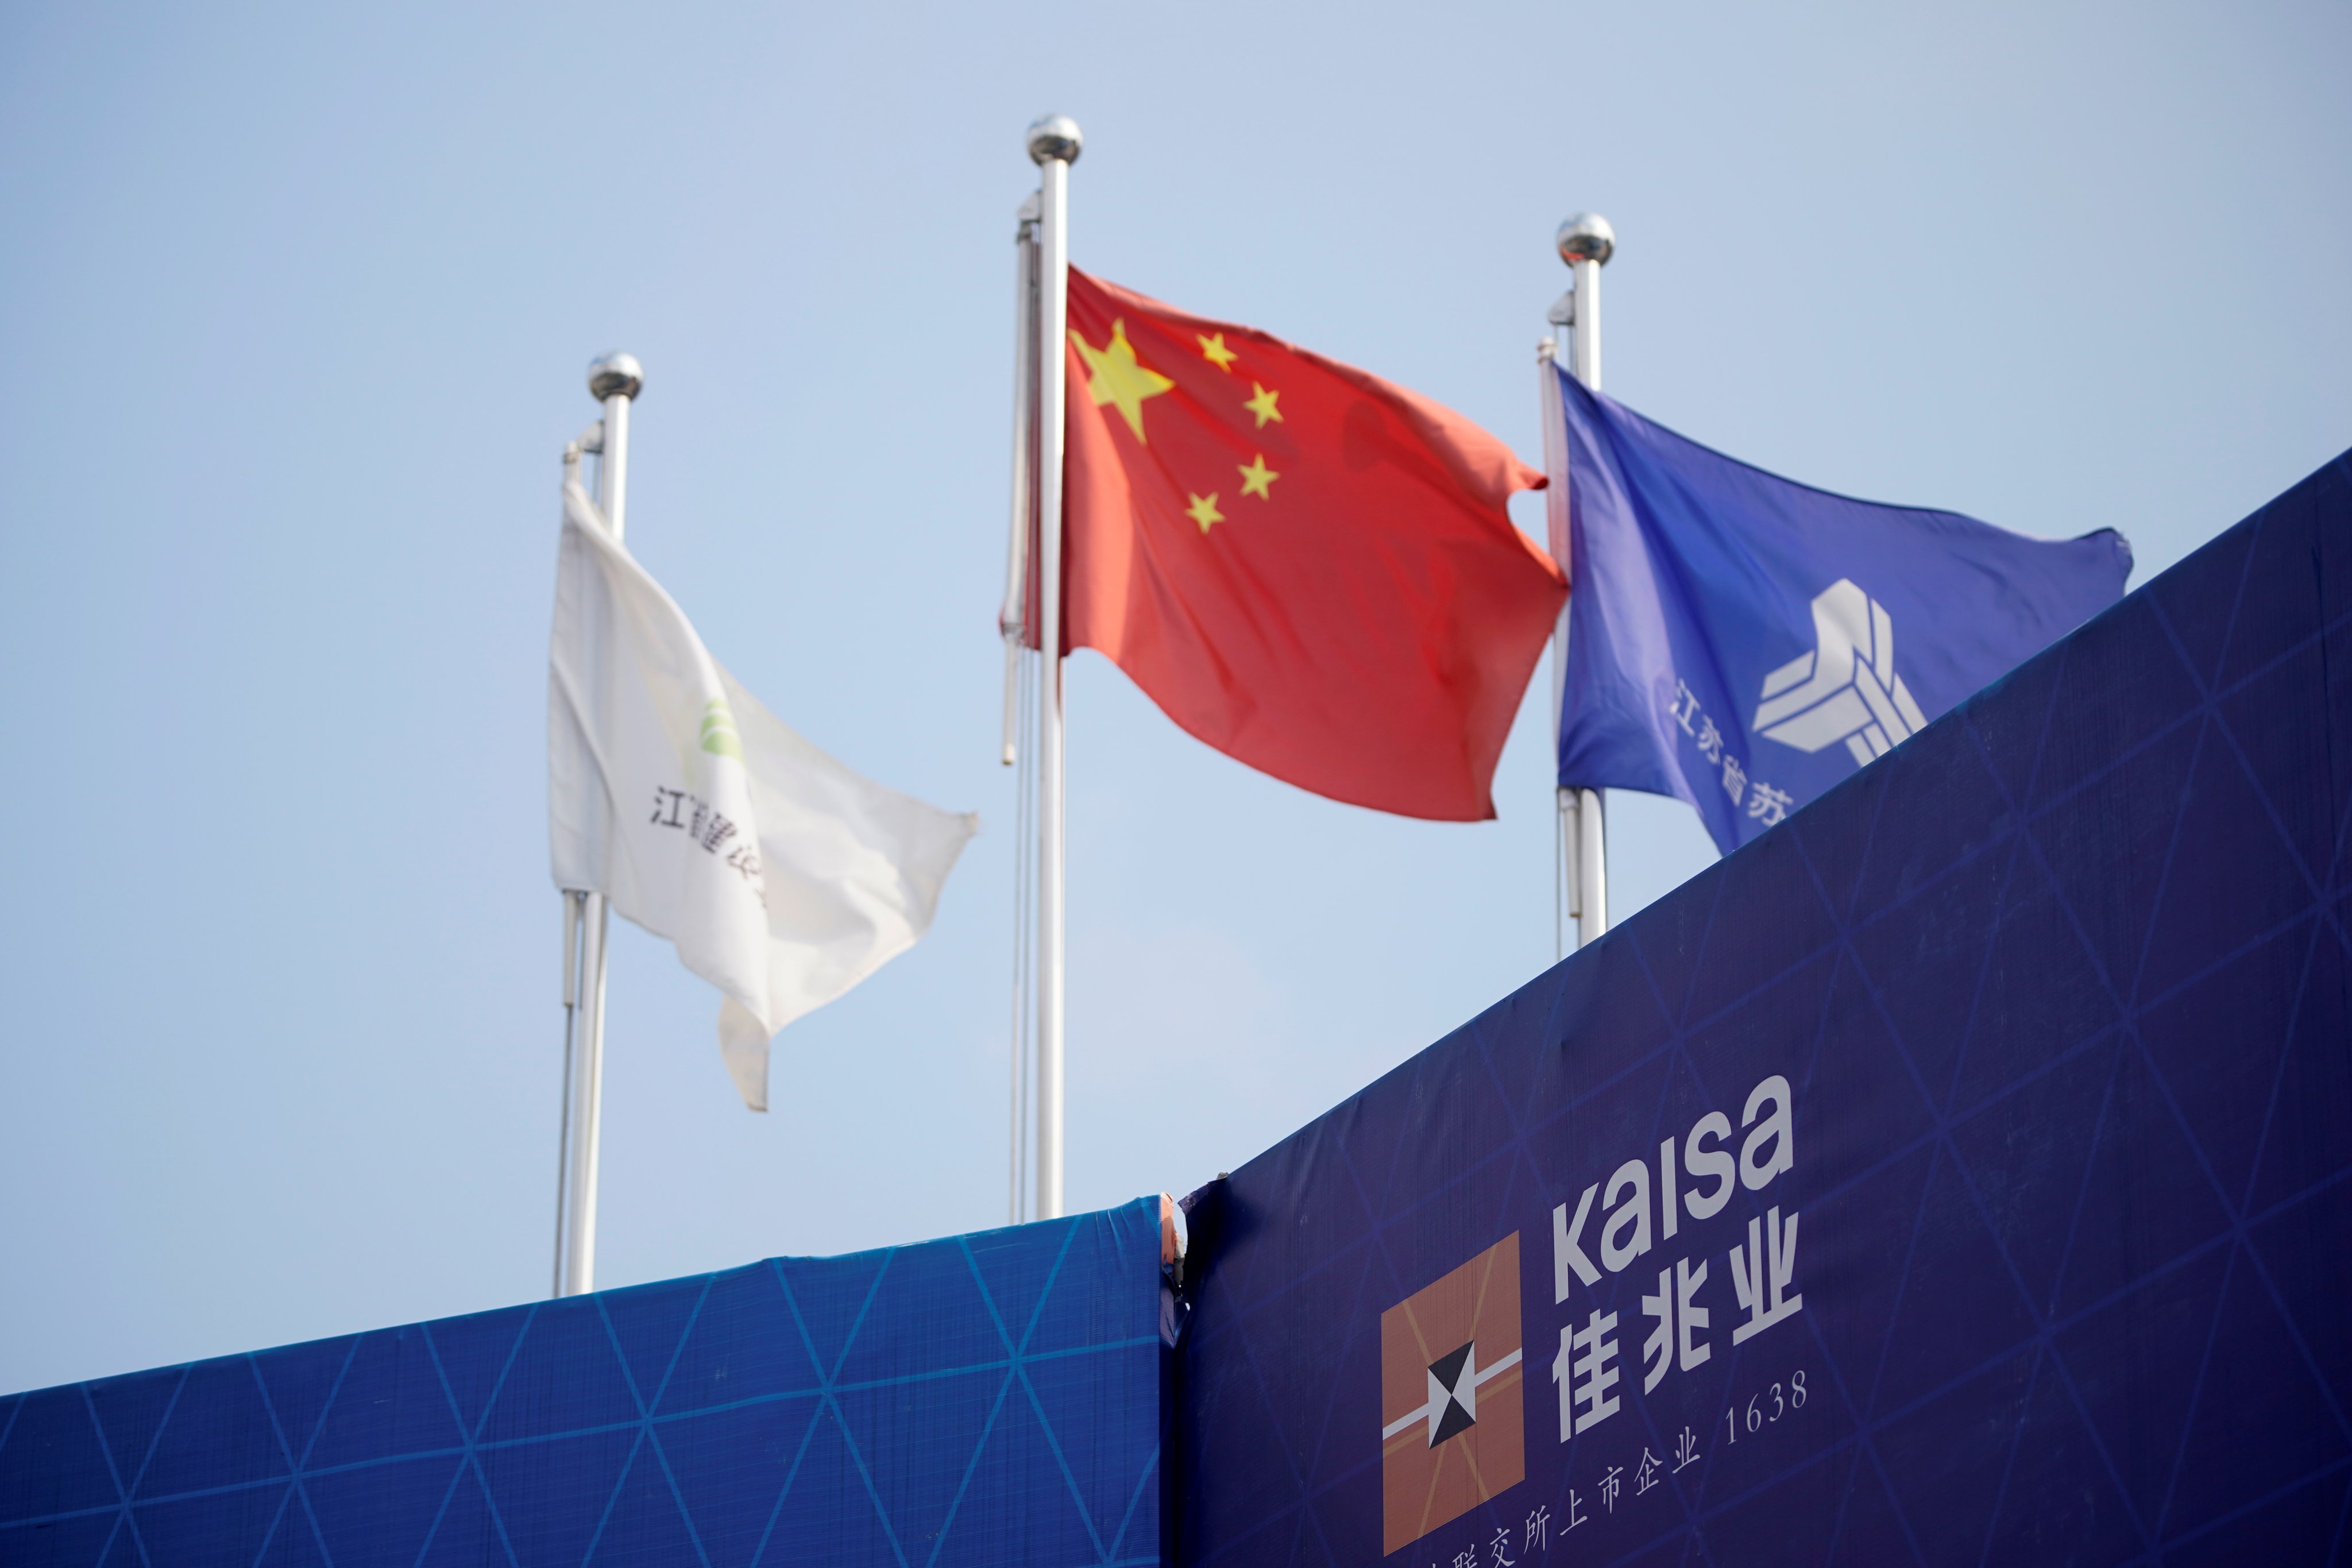 Embattled Kaisa Group Holdings said its Hong Kong-listed shares could resume trading in March. Photo: Reuters